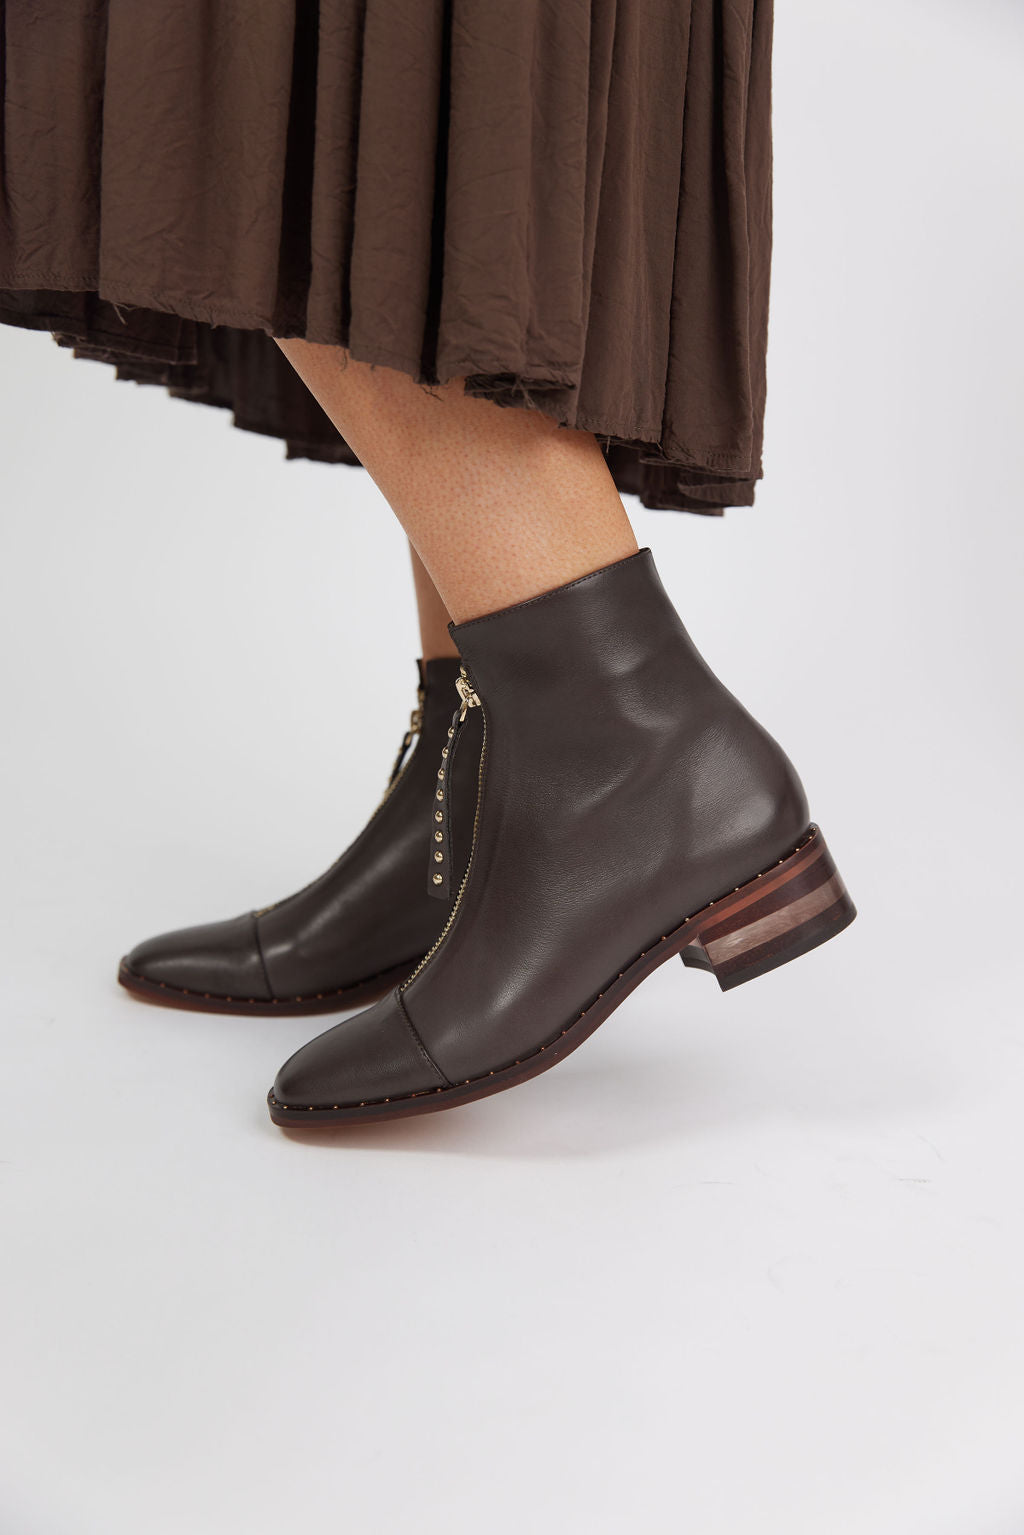 FRIDAYS ANKLE BOOT CHOCOLATE LEATHER